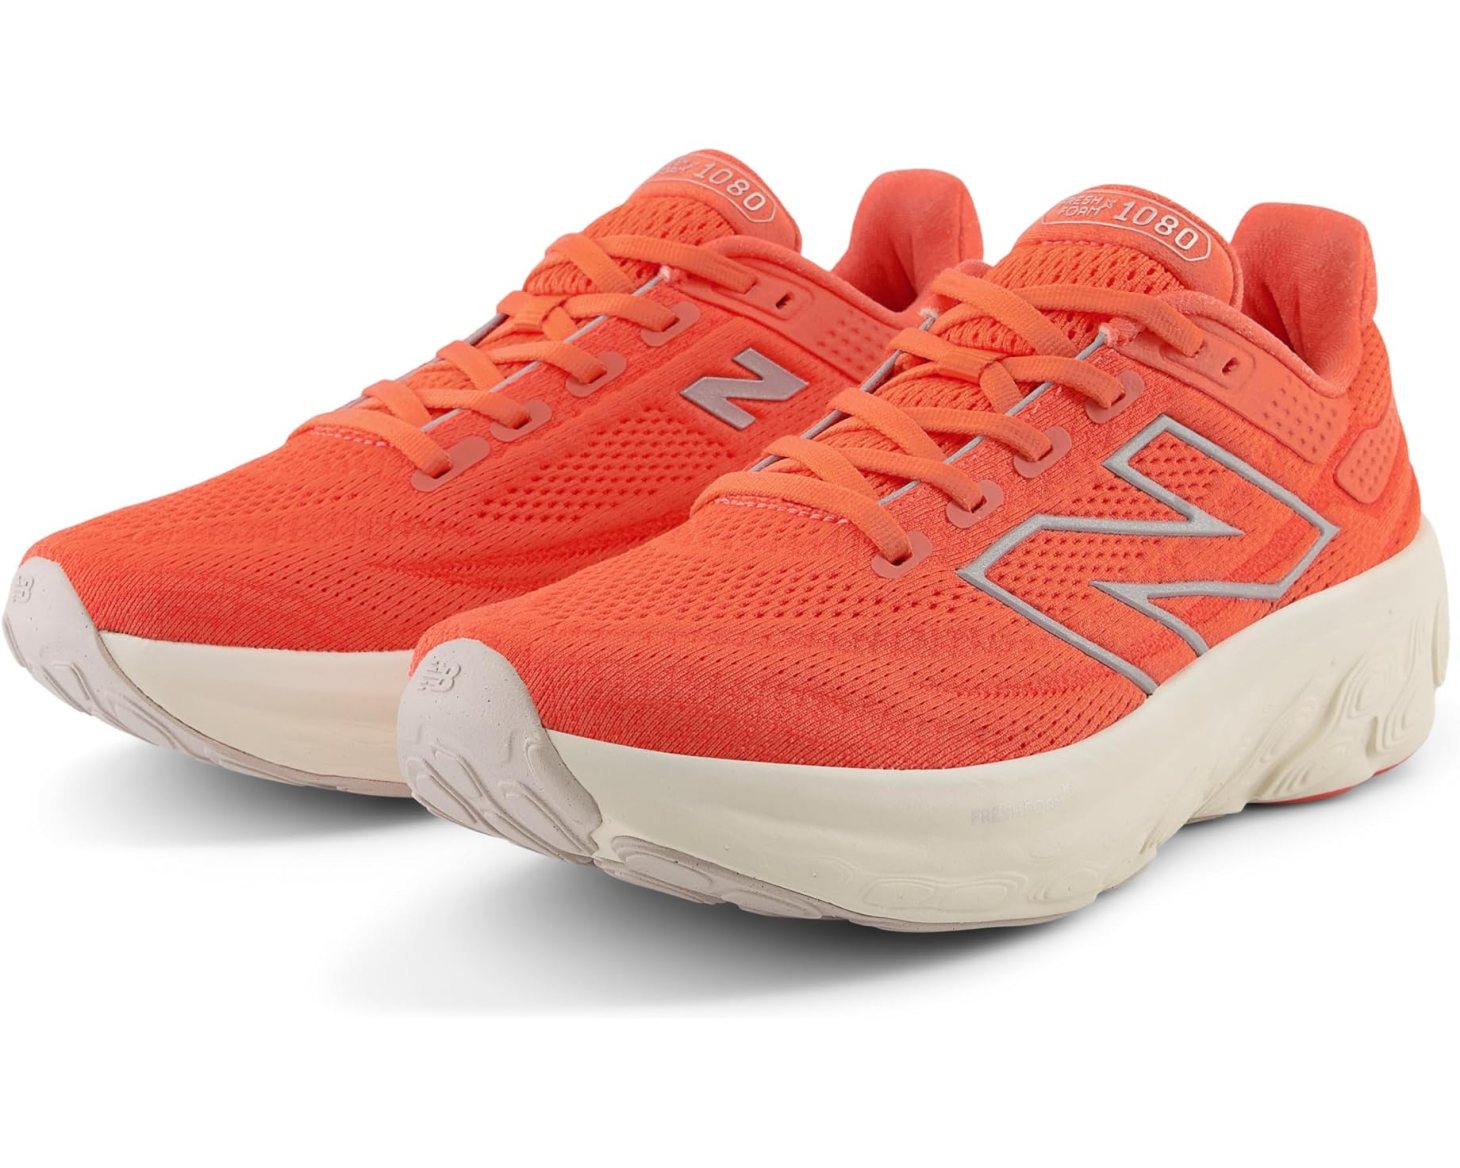 new balance fresh foam x 1080v13, one of the best sneakers with arch support